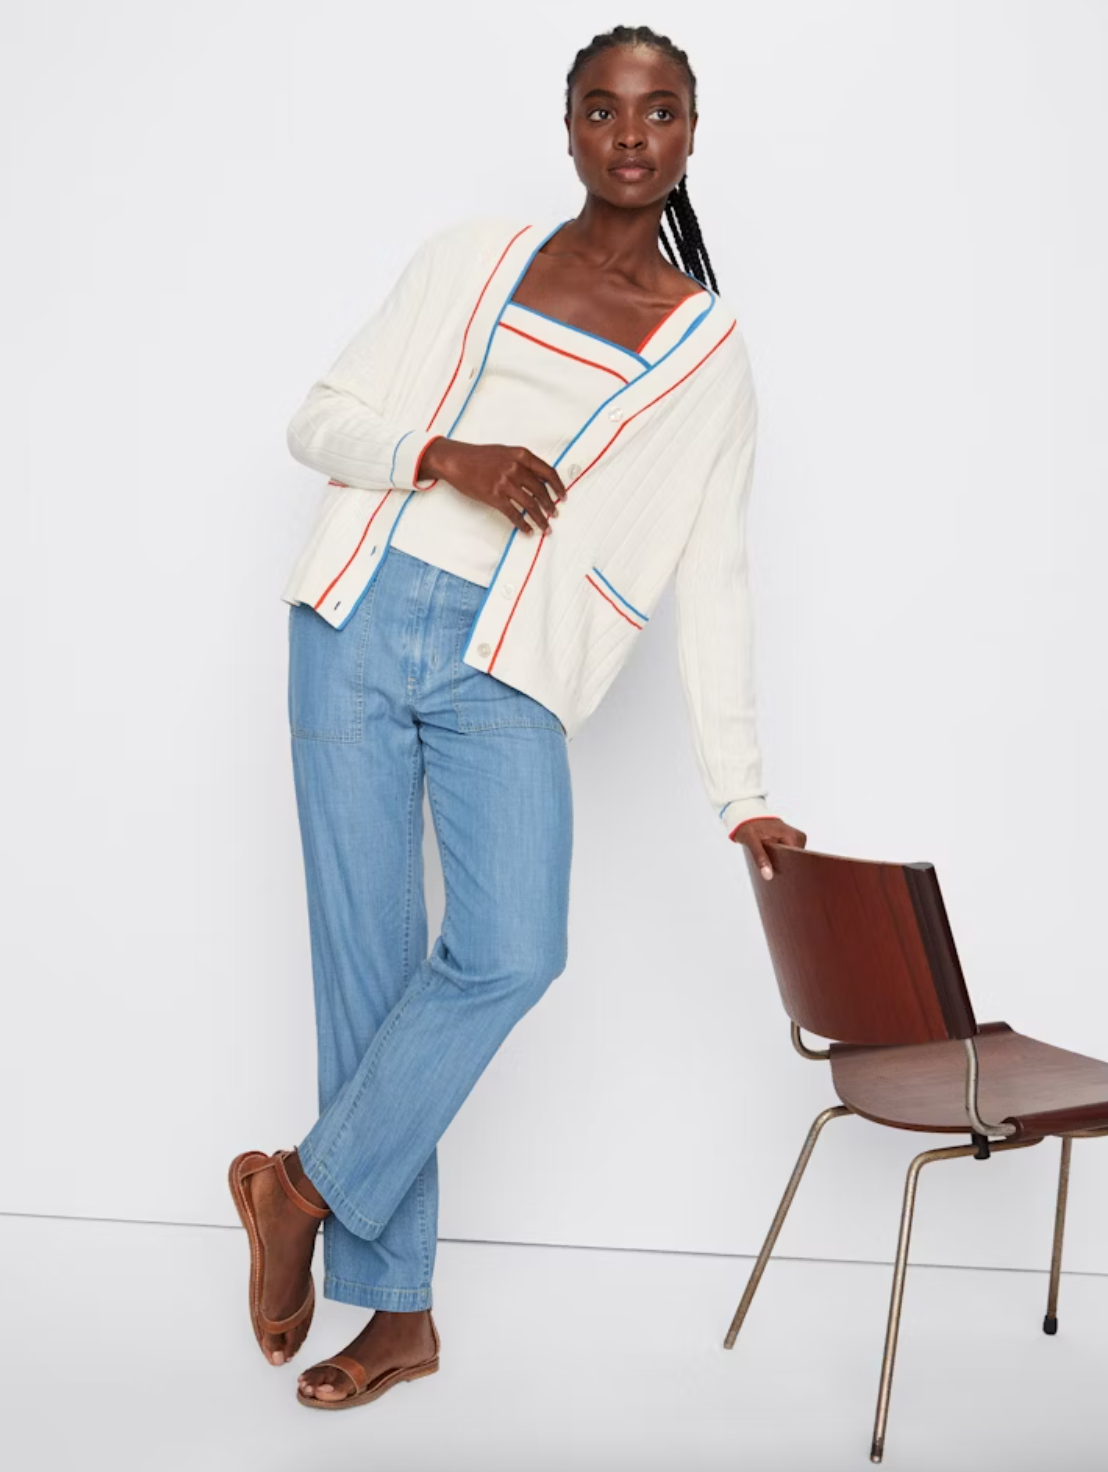 A stylish young woman in a white cardigan and blue jeans, leaning casually against a chair in her Scottsdale, Arizona bungalow. She wears brown open-toe heels and her hair in braids while applying THE DEDE CREAM by Kule.